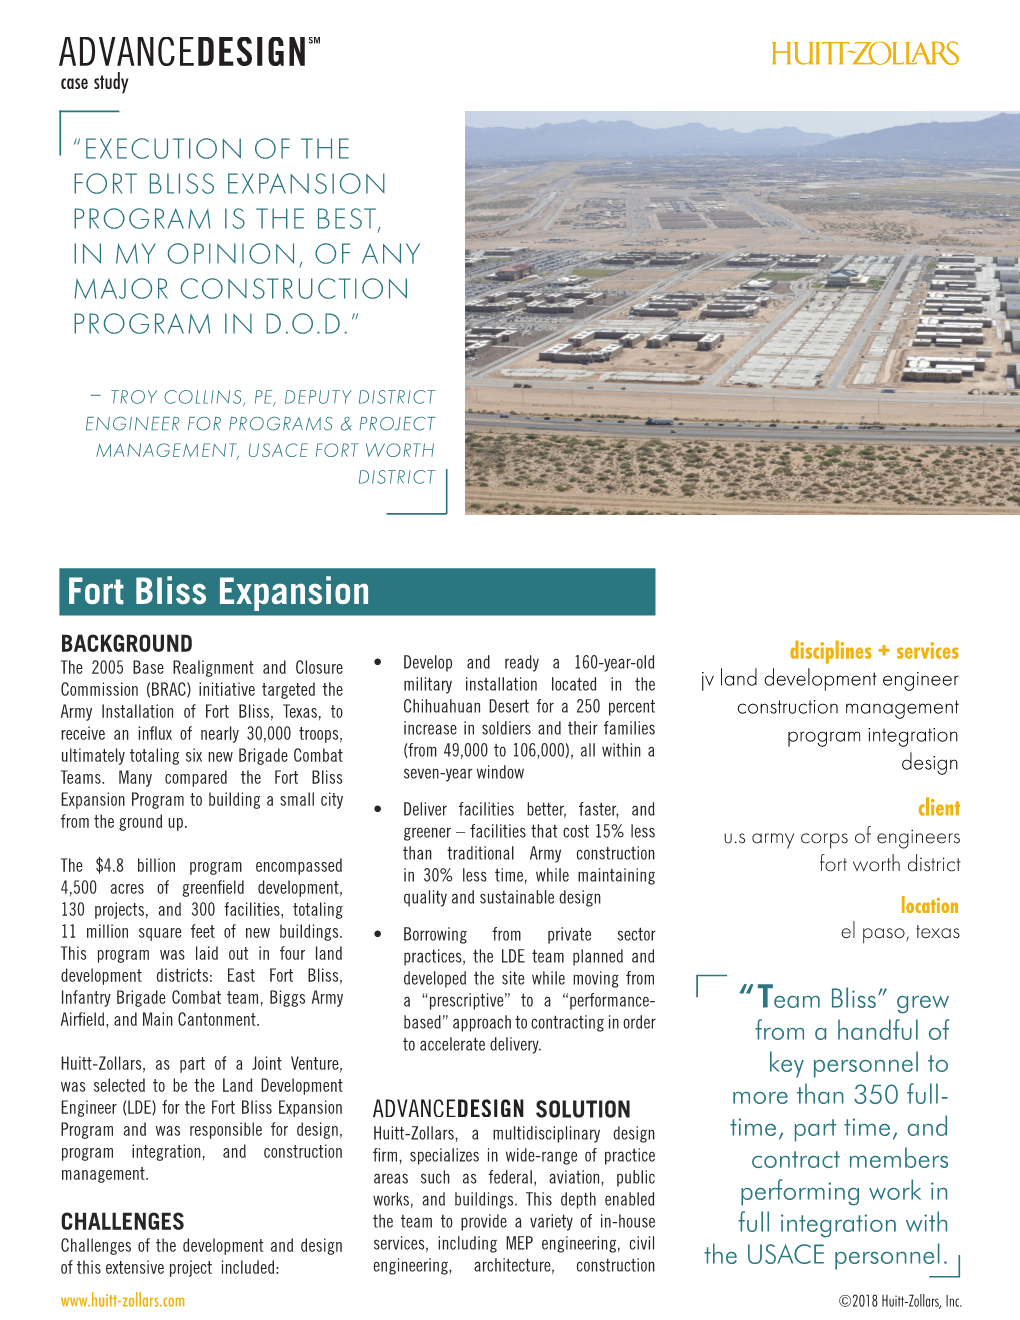 Fort Bliss Expansion Case Study